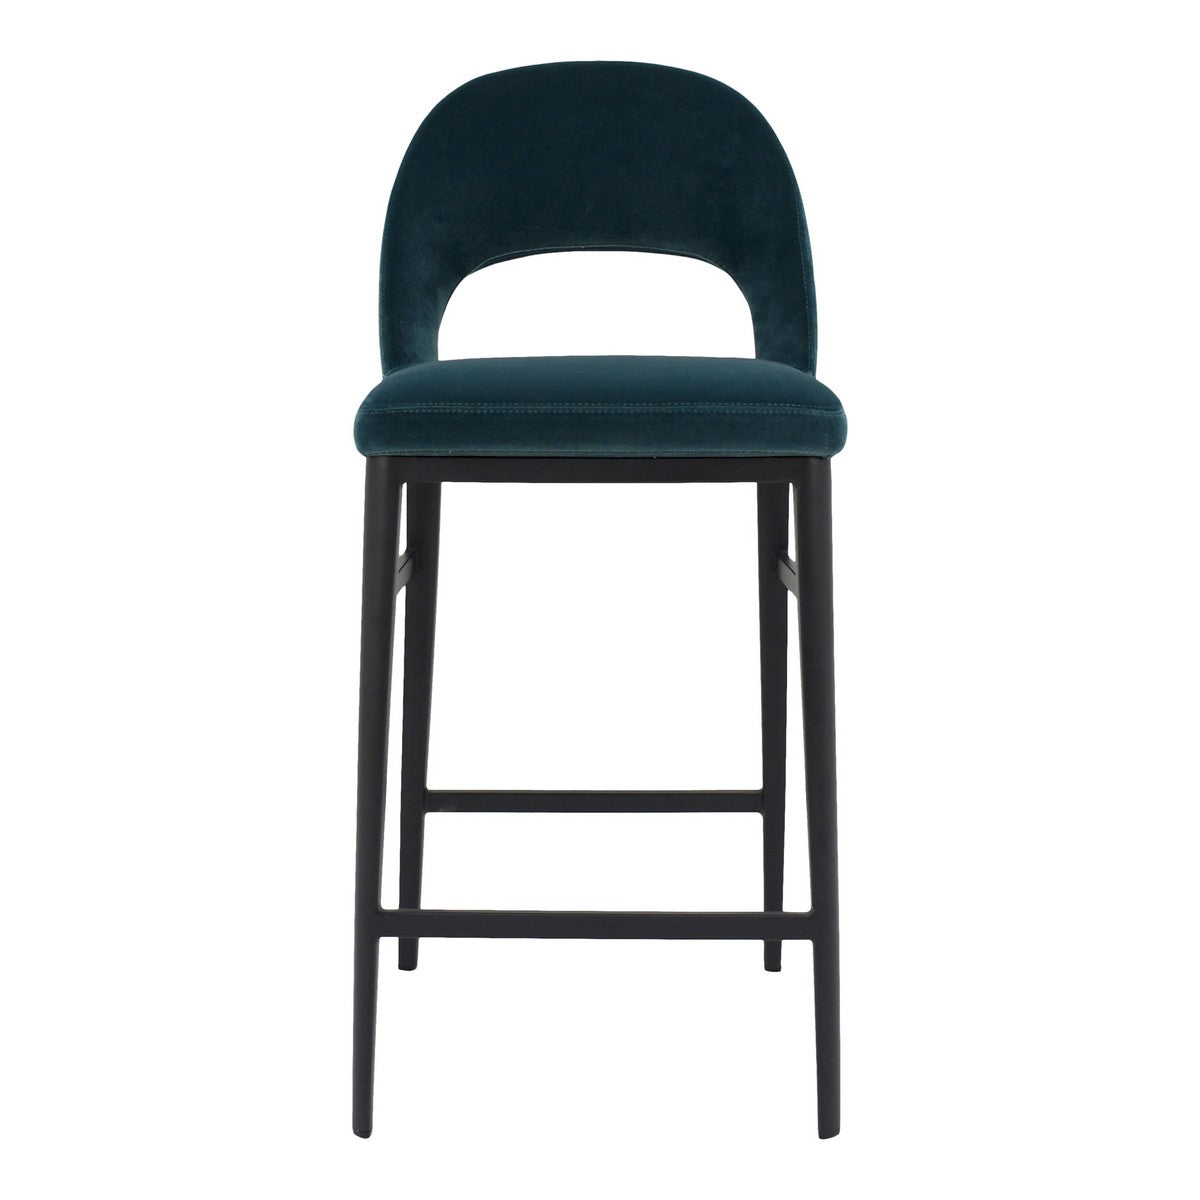 Moe's Home Collection Roger Counter Stool Teal Velvet - EJ-1036-36 - Moe's Home Collection - Counter Stools - Minimal And Modern - 1